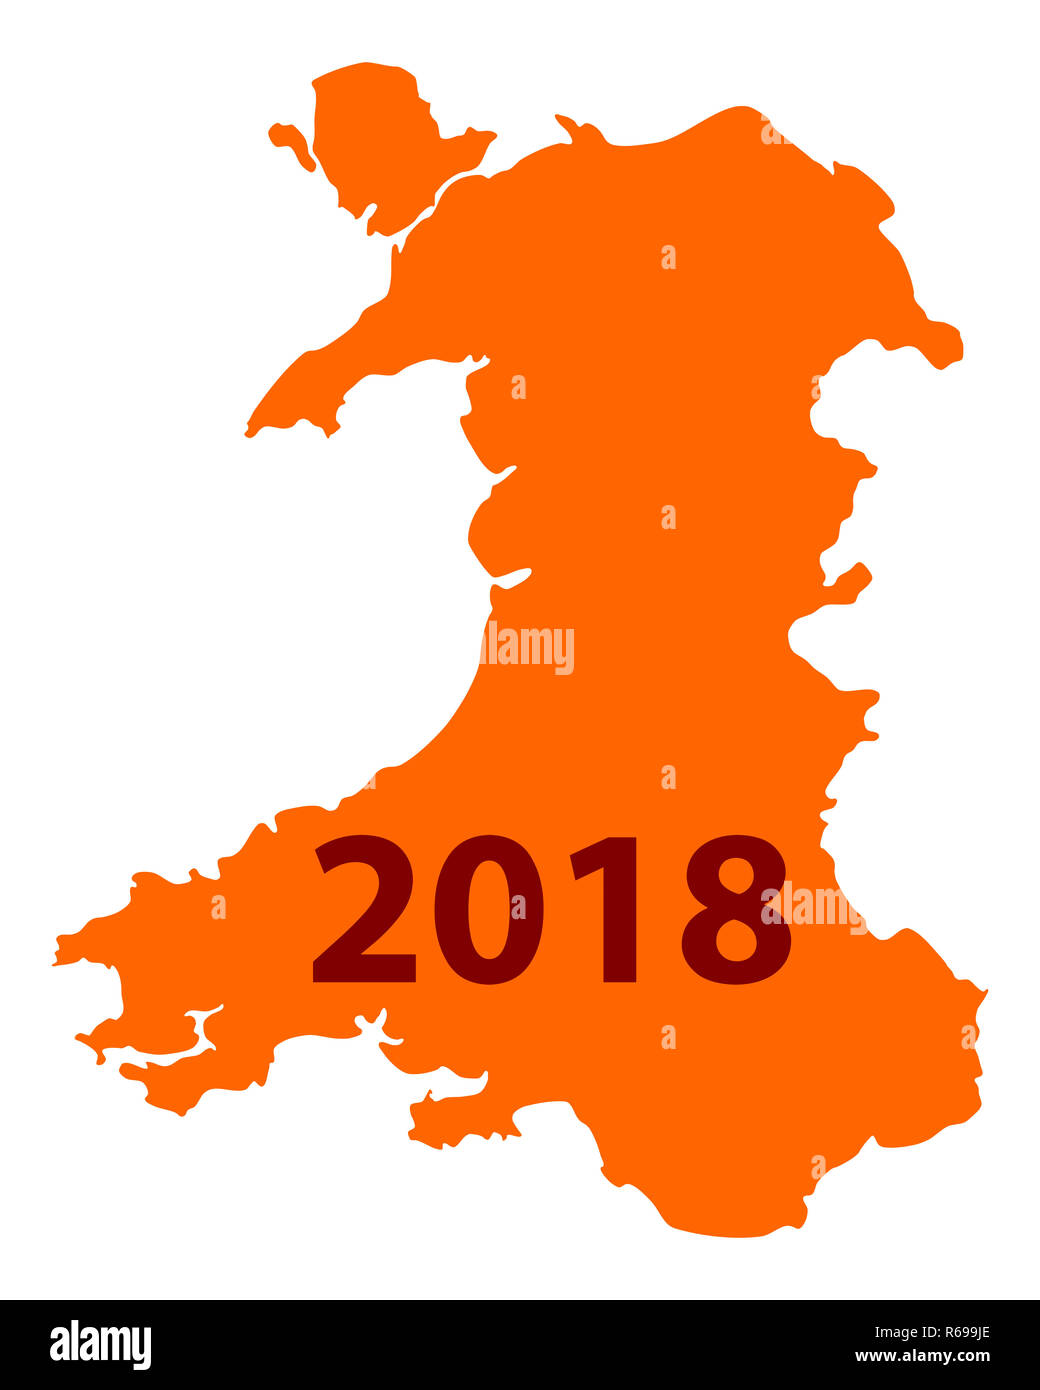 Map Of Wales 2018 R699JE 